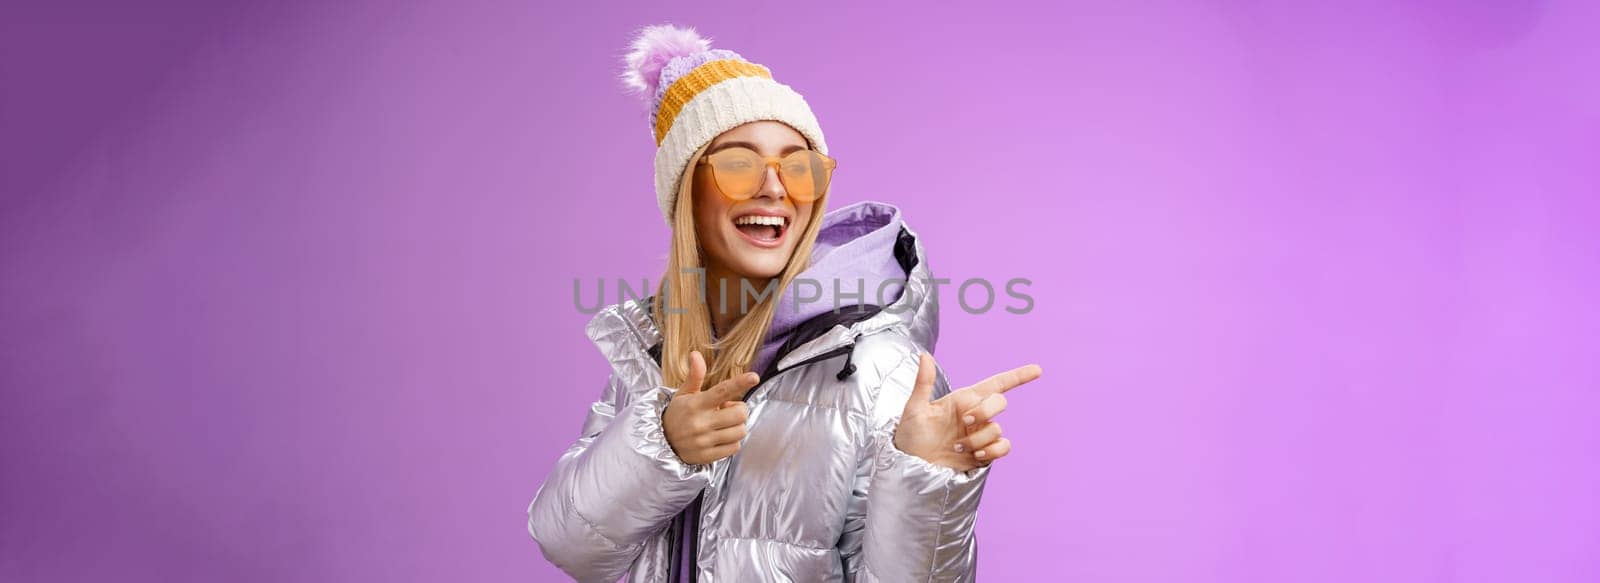 Hey how you doin. Cheeky stylish bond girl having fun greeting friend pointing finger pistols left smiling sassy say hello what up wearing cool silver jacket hat sunglasses, purple background by Benzoix